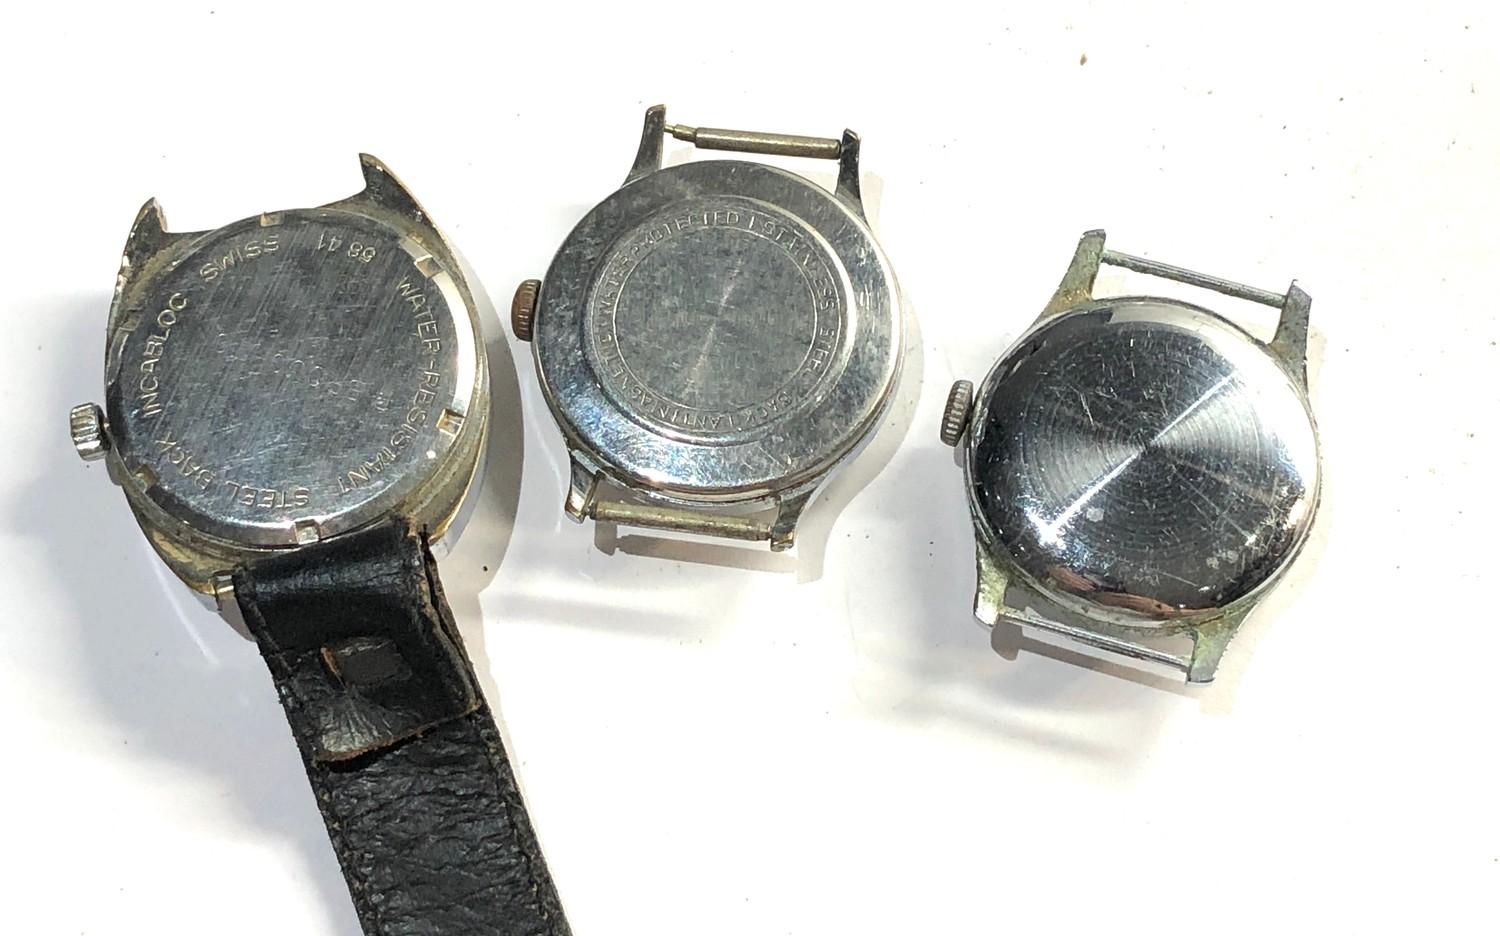 3 Vintage gents wristwatches all ticking but no warranty given please see images for details - Image 2 of 2